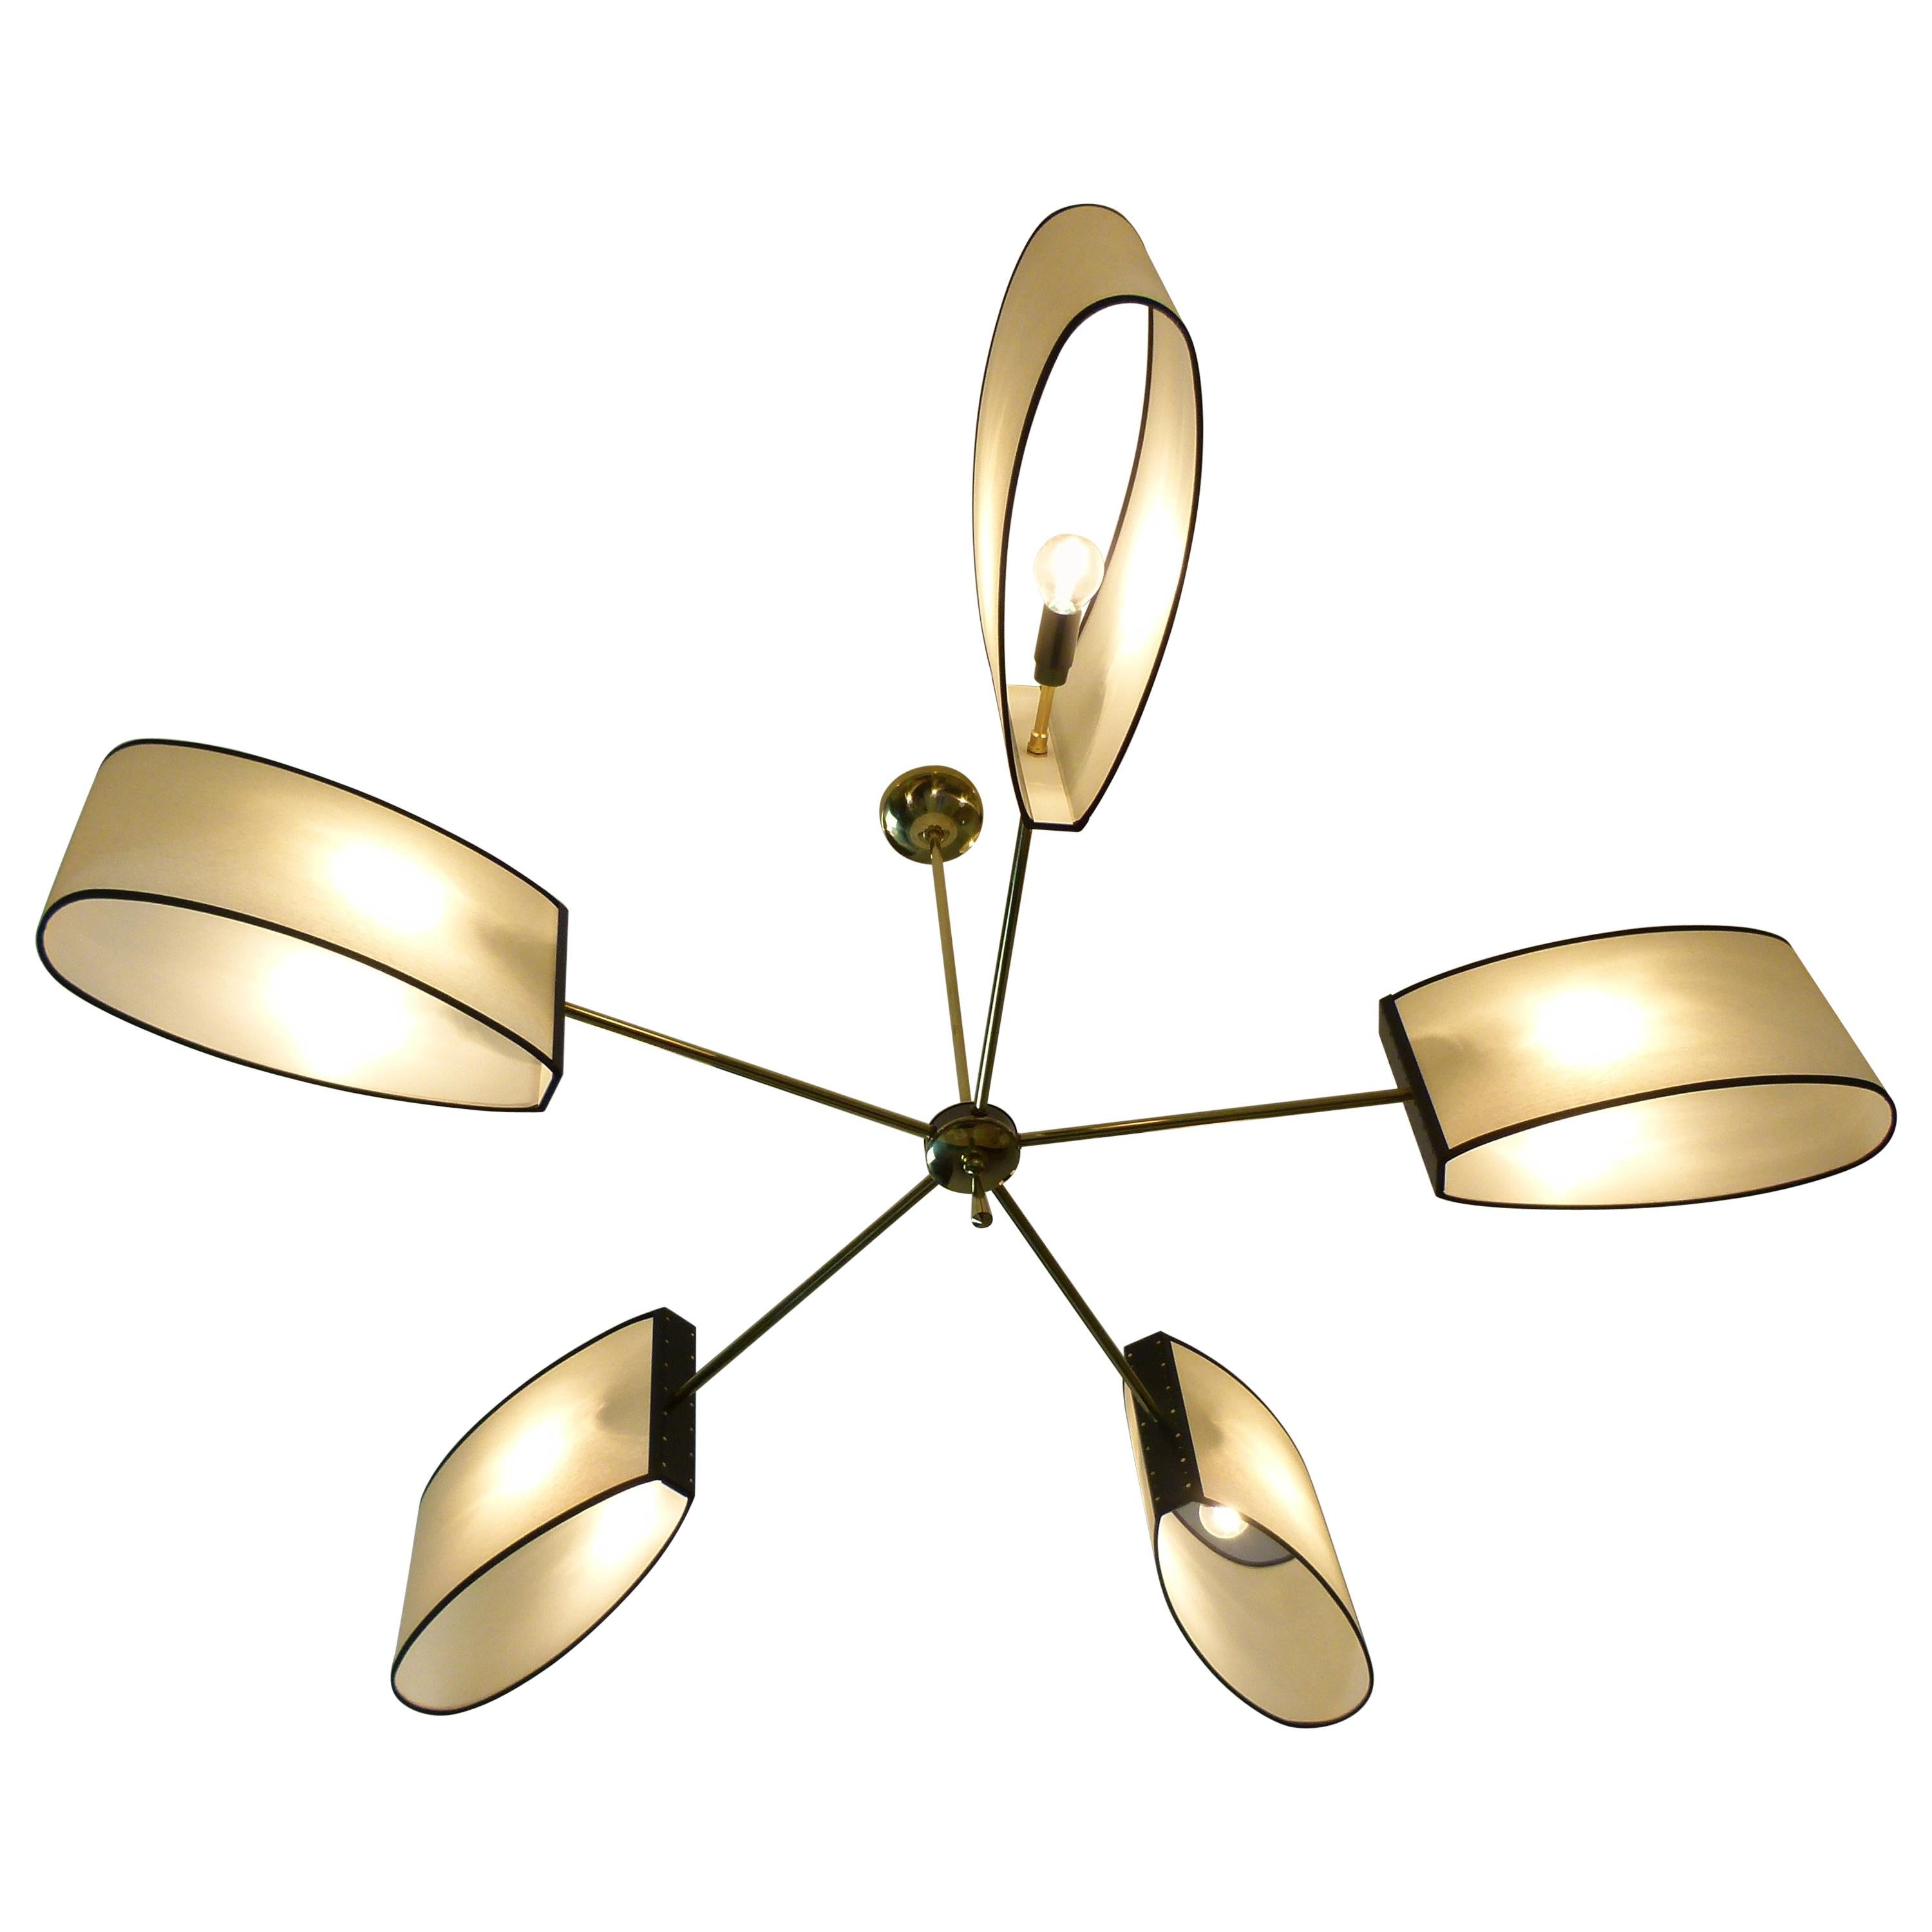 1950s Circular chandelier with Five Arms of Light by Maison Lunel